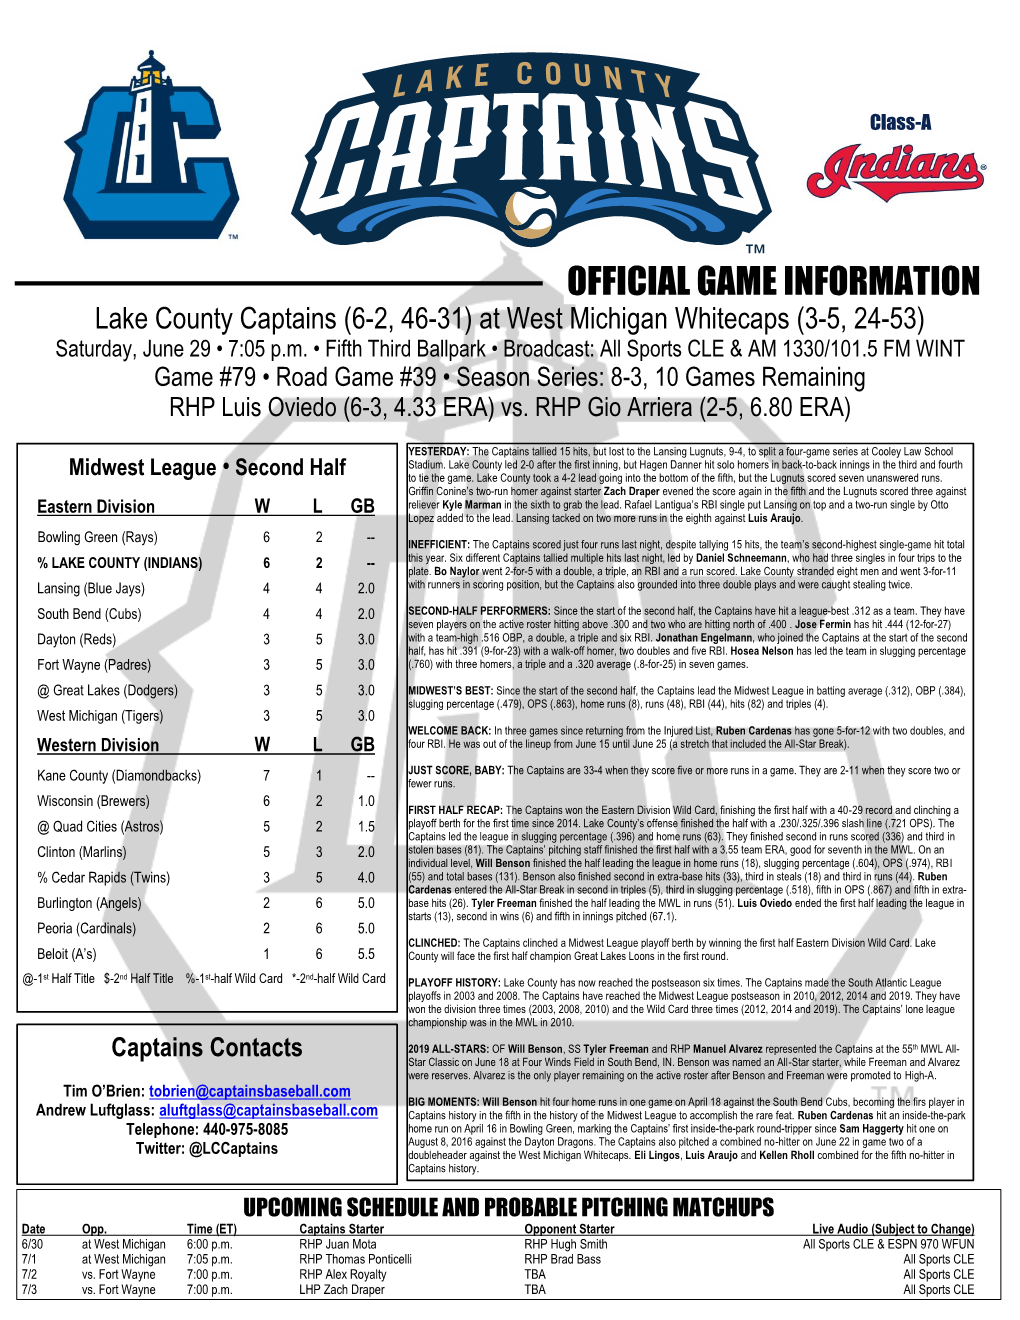 OFFICIAL GAME INFORMATION Lake County Captains (6-2, 46-31) at West Michigan Whitecaps (3-5, 24-53) Saturday, June 29 • 7:05 P.M